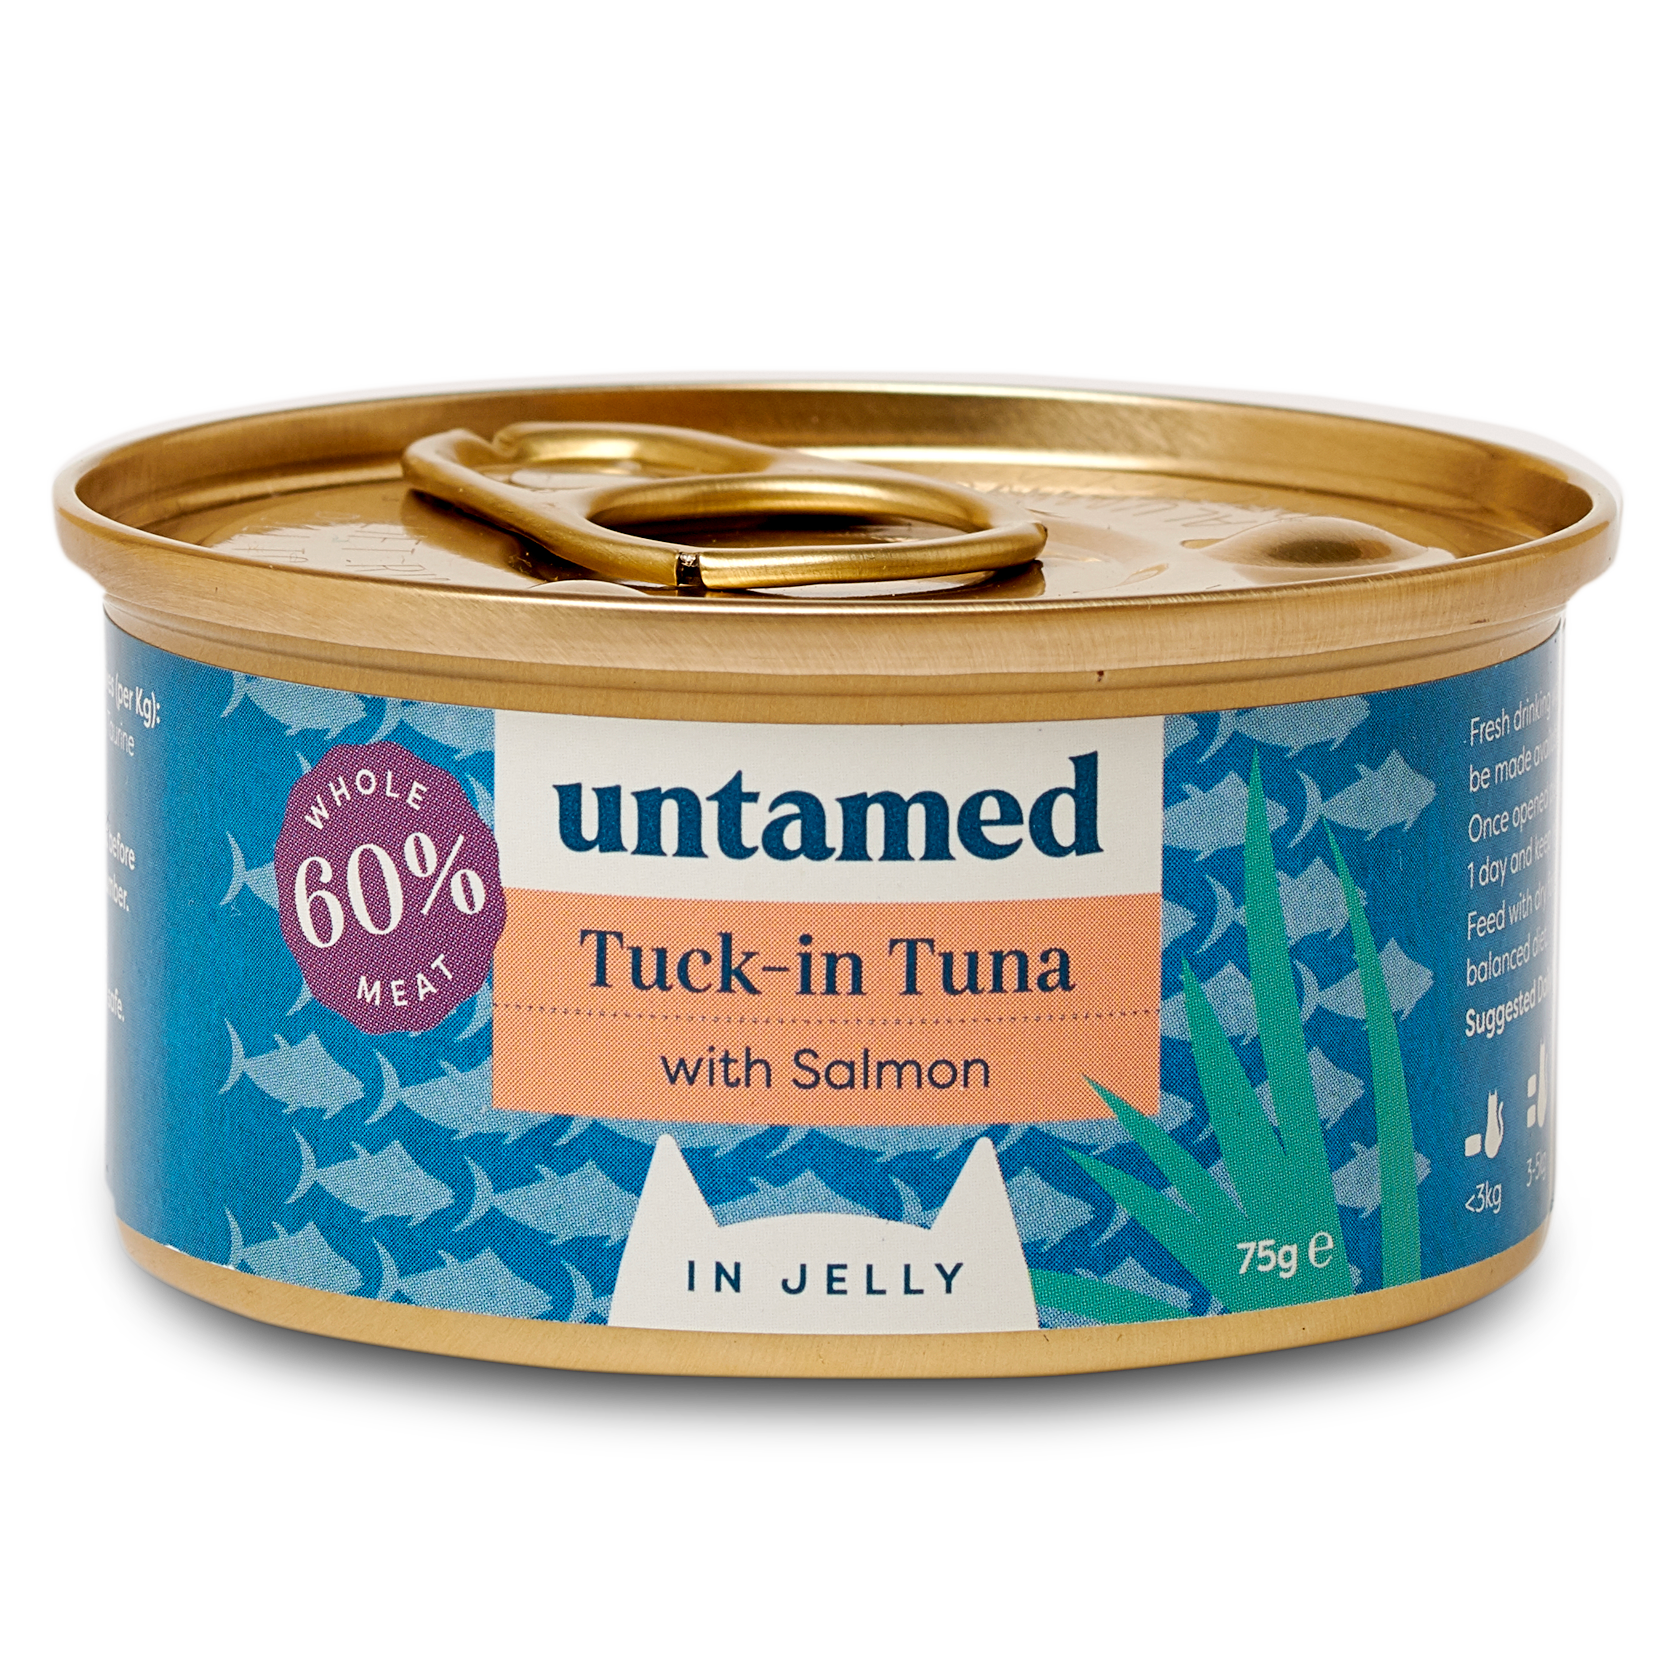 Tuck-in Tuna with Salmon in Jelly